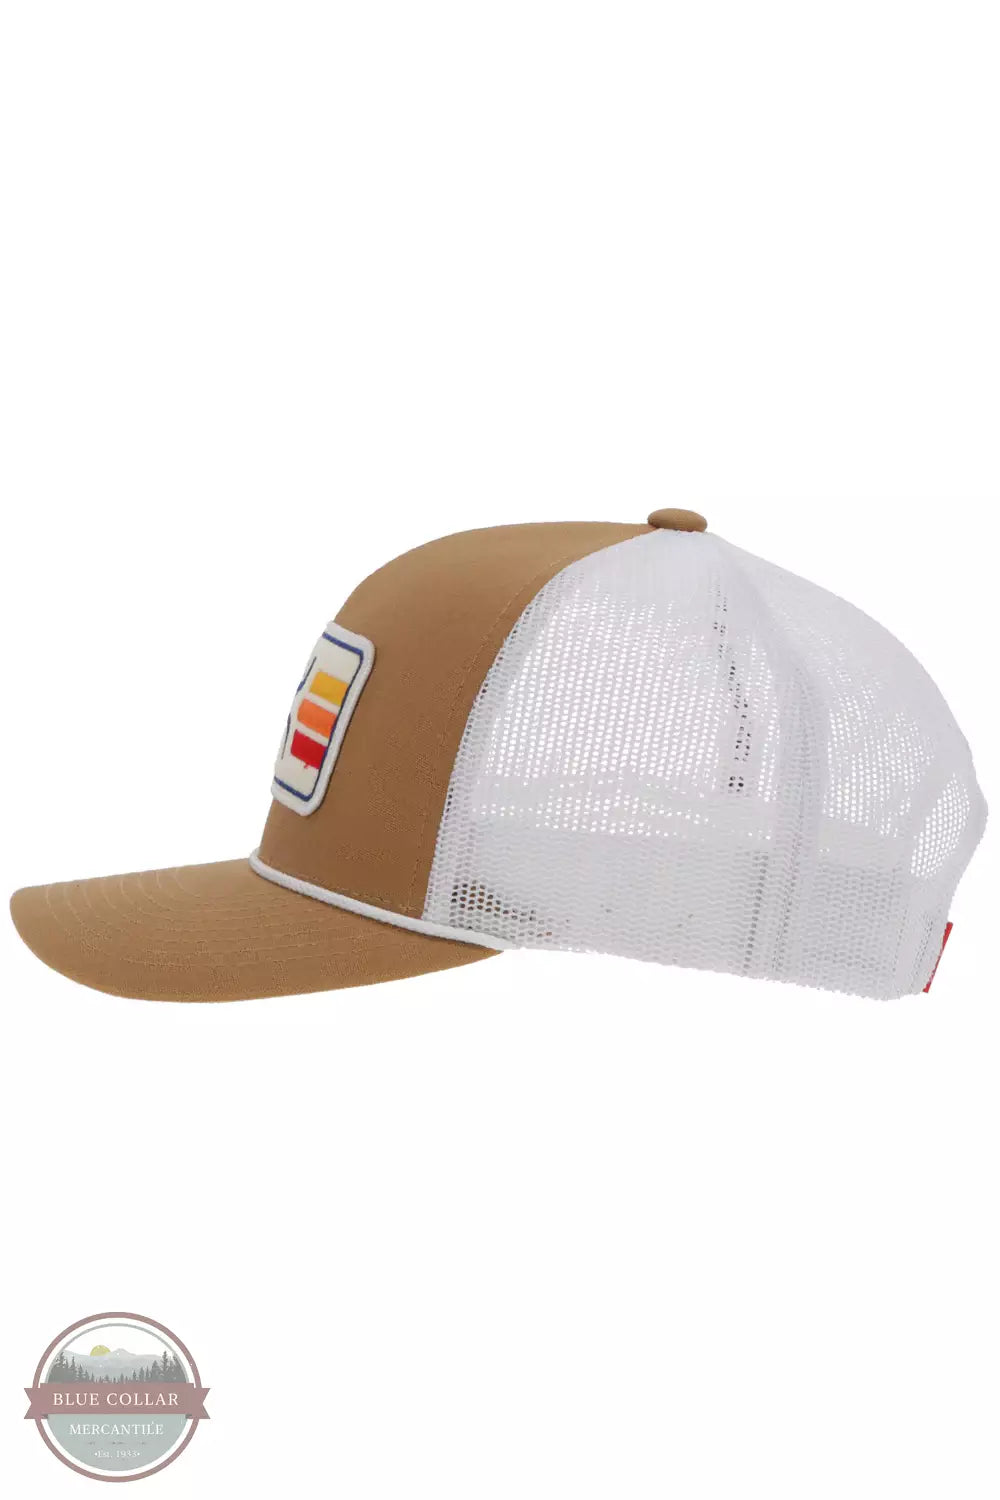 Hooey 2339T Sunset Cap Tan /  White Side View